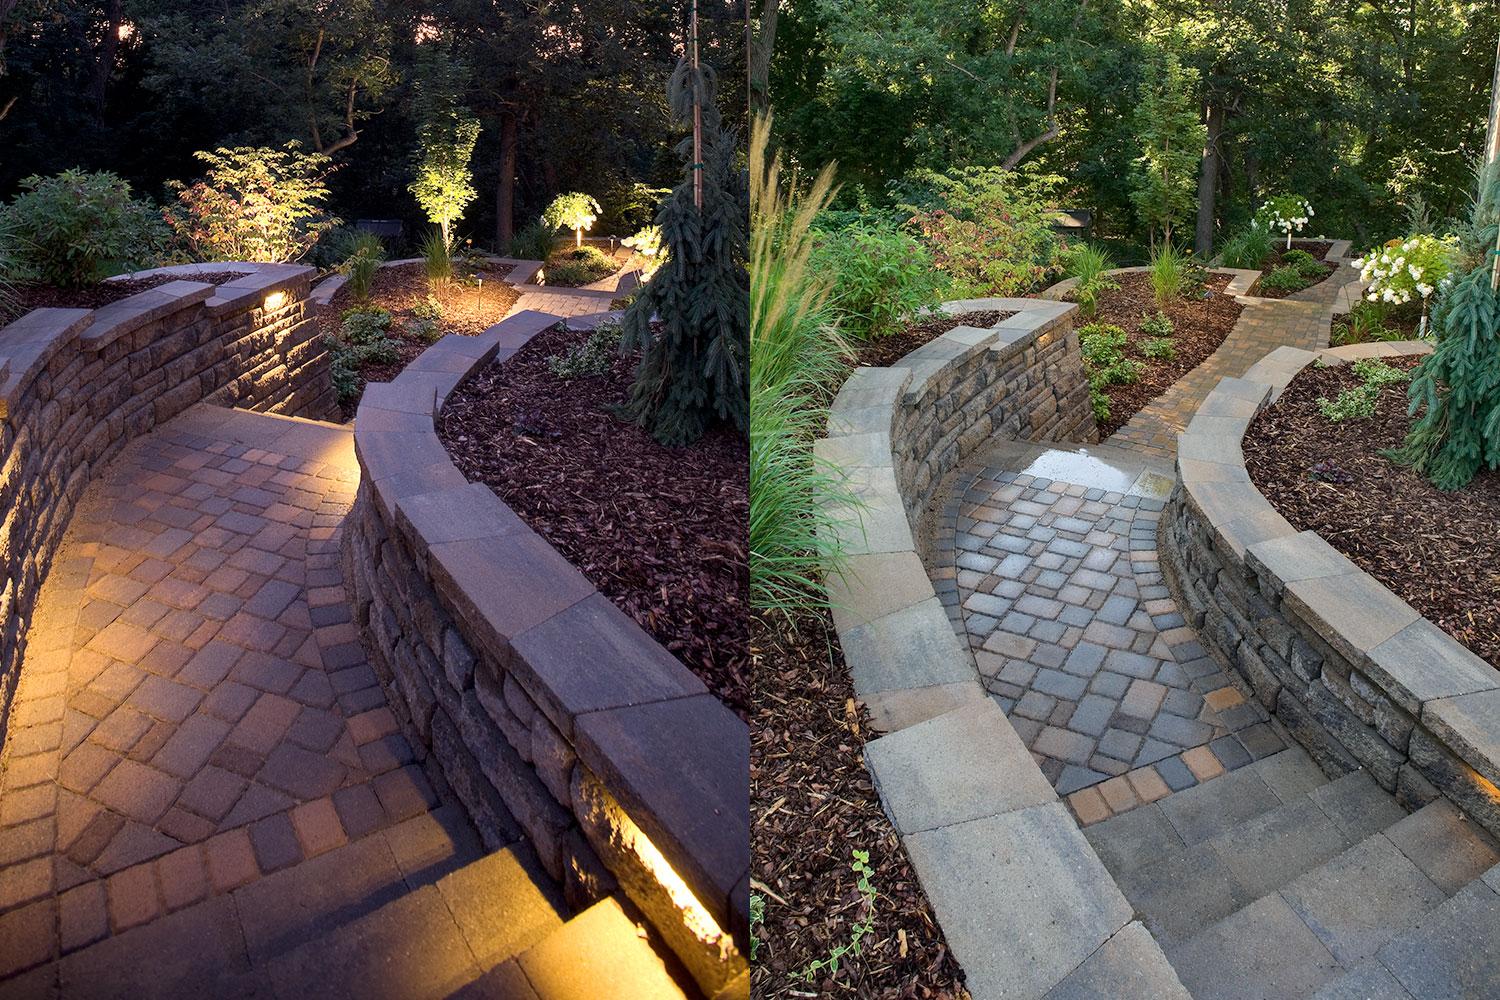 Brick paver walkway with built-in sconces.